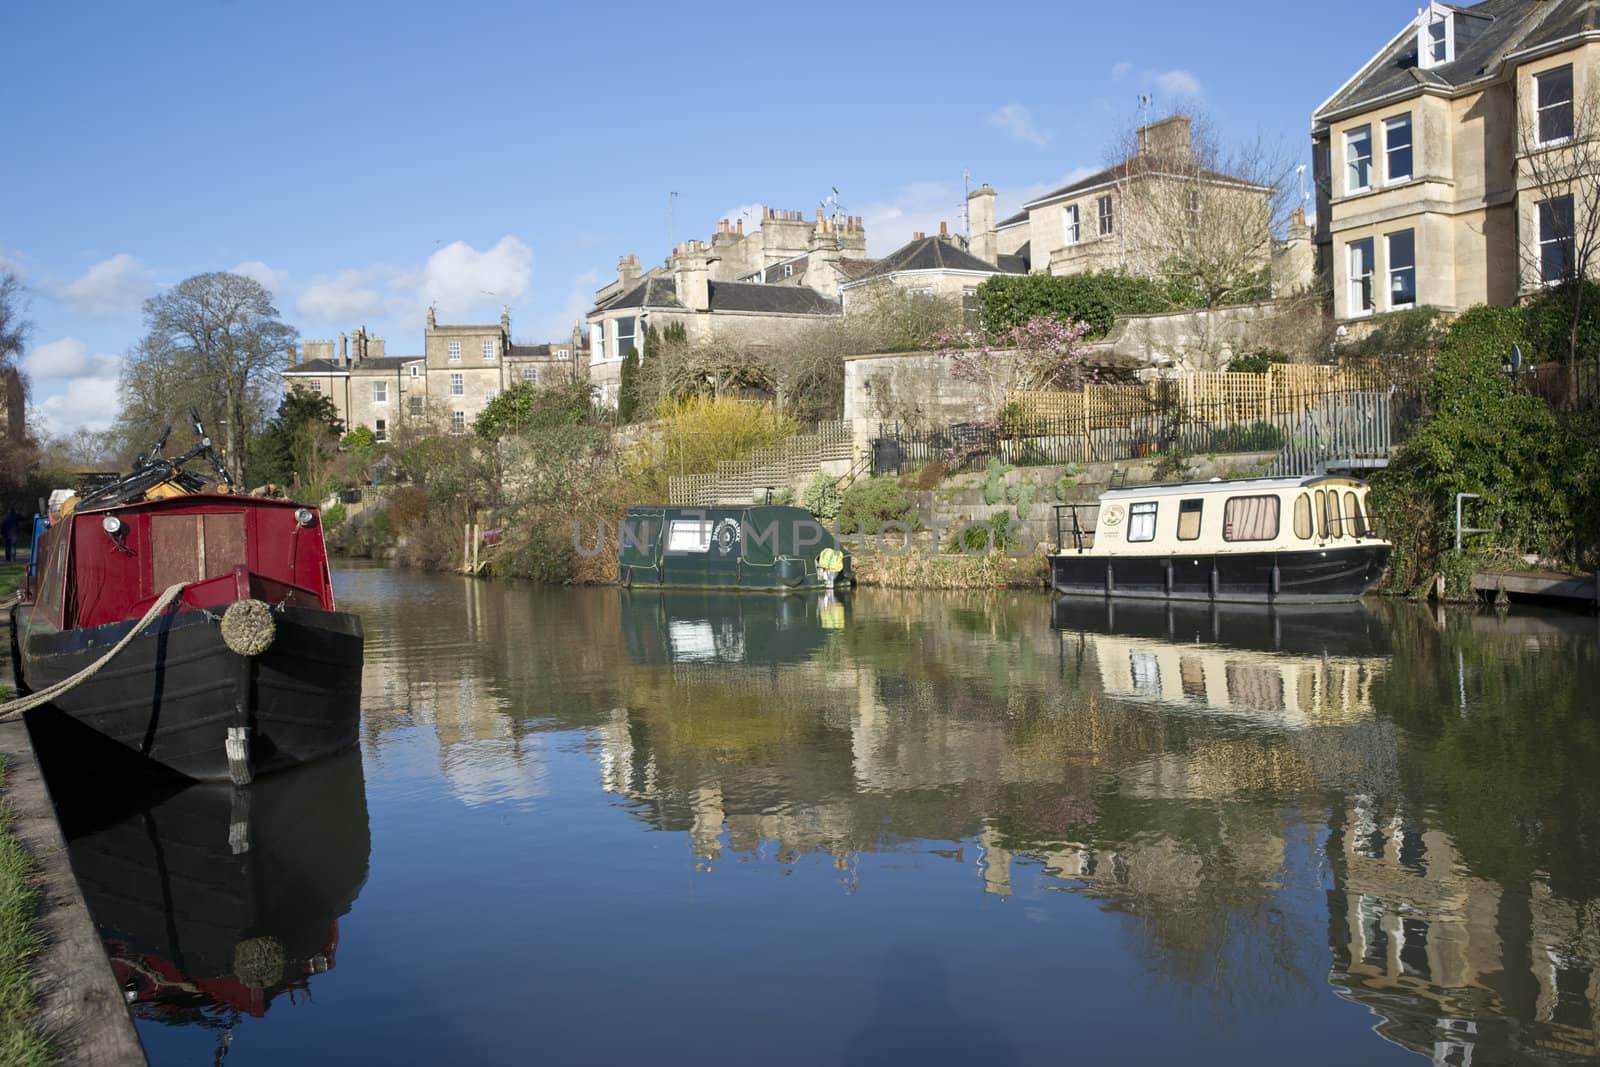 Boats line the banks of the Kennet and Avon Canal running through the historic city of Bath in Somerset, England